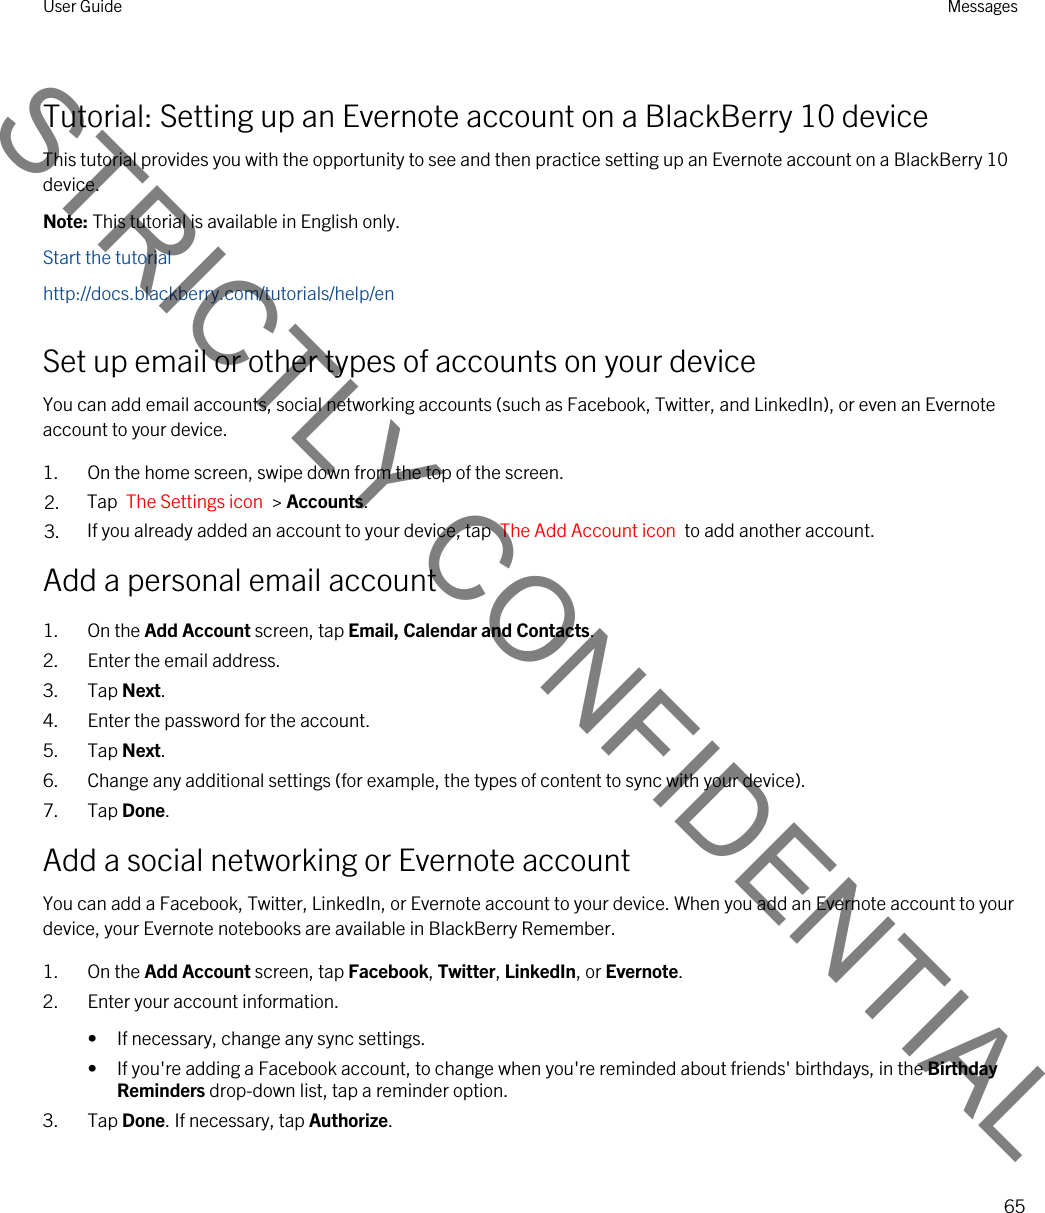 Tutorial: Setting up an Evernote account on a BlackBerry 10 deviceThis tutorial provides you with the opportunity to see and then practice setting up an Evernote account on a BlackBerry 10 device.Note: This tutorial is available in English only.Start the tutorialhttp://docs.blackberry.com/tutorials/help/enSet up email or other types of accounts on your deviceYou can add email accounts, social networking accounts (such as Facebook, Twitter, and LinkedIn), or even an Evernote account to your device.1. On the home screen, swipe down from the top of the screen.2. Tap  The Settings icon  &gt; Accounts.3. If you already added an account to your device, tap  The Add Account icon  to add another account.Add a personal email account1. On the Add Account screen, tap Email, Calendar and Contacts.2. Enter the email address.3. Tap Next.4. Enter the password for the account.5. Tap Next.6. Change any additional settings (for example, the types of content to sync with your device).7. Tap Done.Add a social networking or Evernote accountYou can add a Facebook, Twitter, LinkedIn, or Evernote account to your device. When you add an Evernote account to your device, your Evernote notebooks are available in BlackBerry Remember.1. On the Add Account screen, tap Facebook, Twitter, LinkedIn, or Evernote.2. Enter your account information.• If necessary, change any sync settings.• If you&apos;re adding a Facebook account, to change when you&apos;re reminded about friends&apos; birthdays, in the Birthday Reminders drop-down list, tap a reminder option.3. Tap Done. If necessary, tap Authorize.User Guide Messages65STRICTLY CONFIDENTIAL